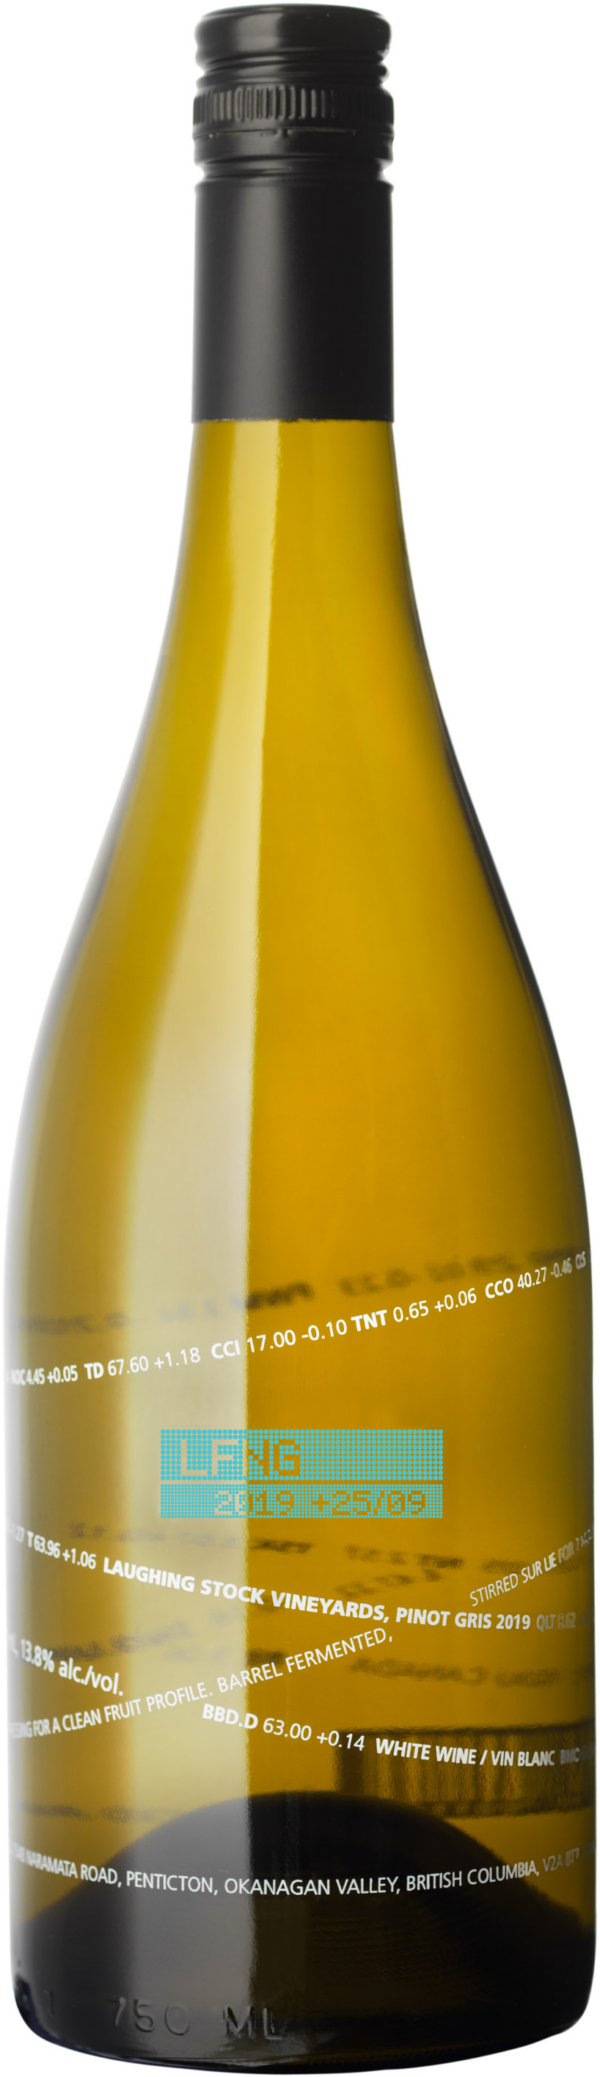 Product image of Laughing Stock Vineyards Pinot Gris 2021 from 8wines